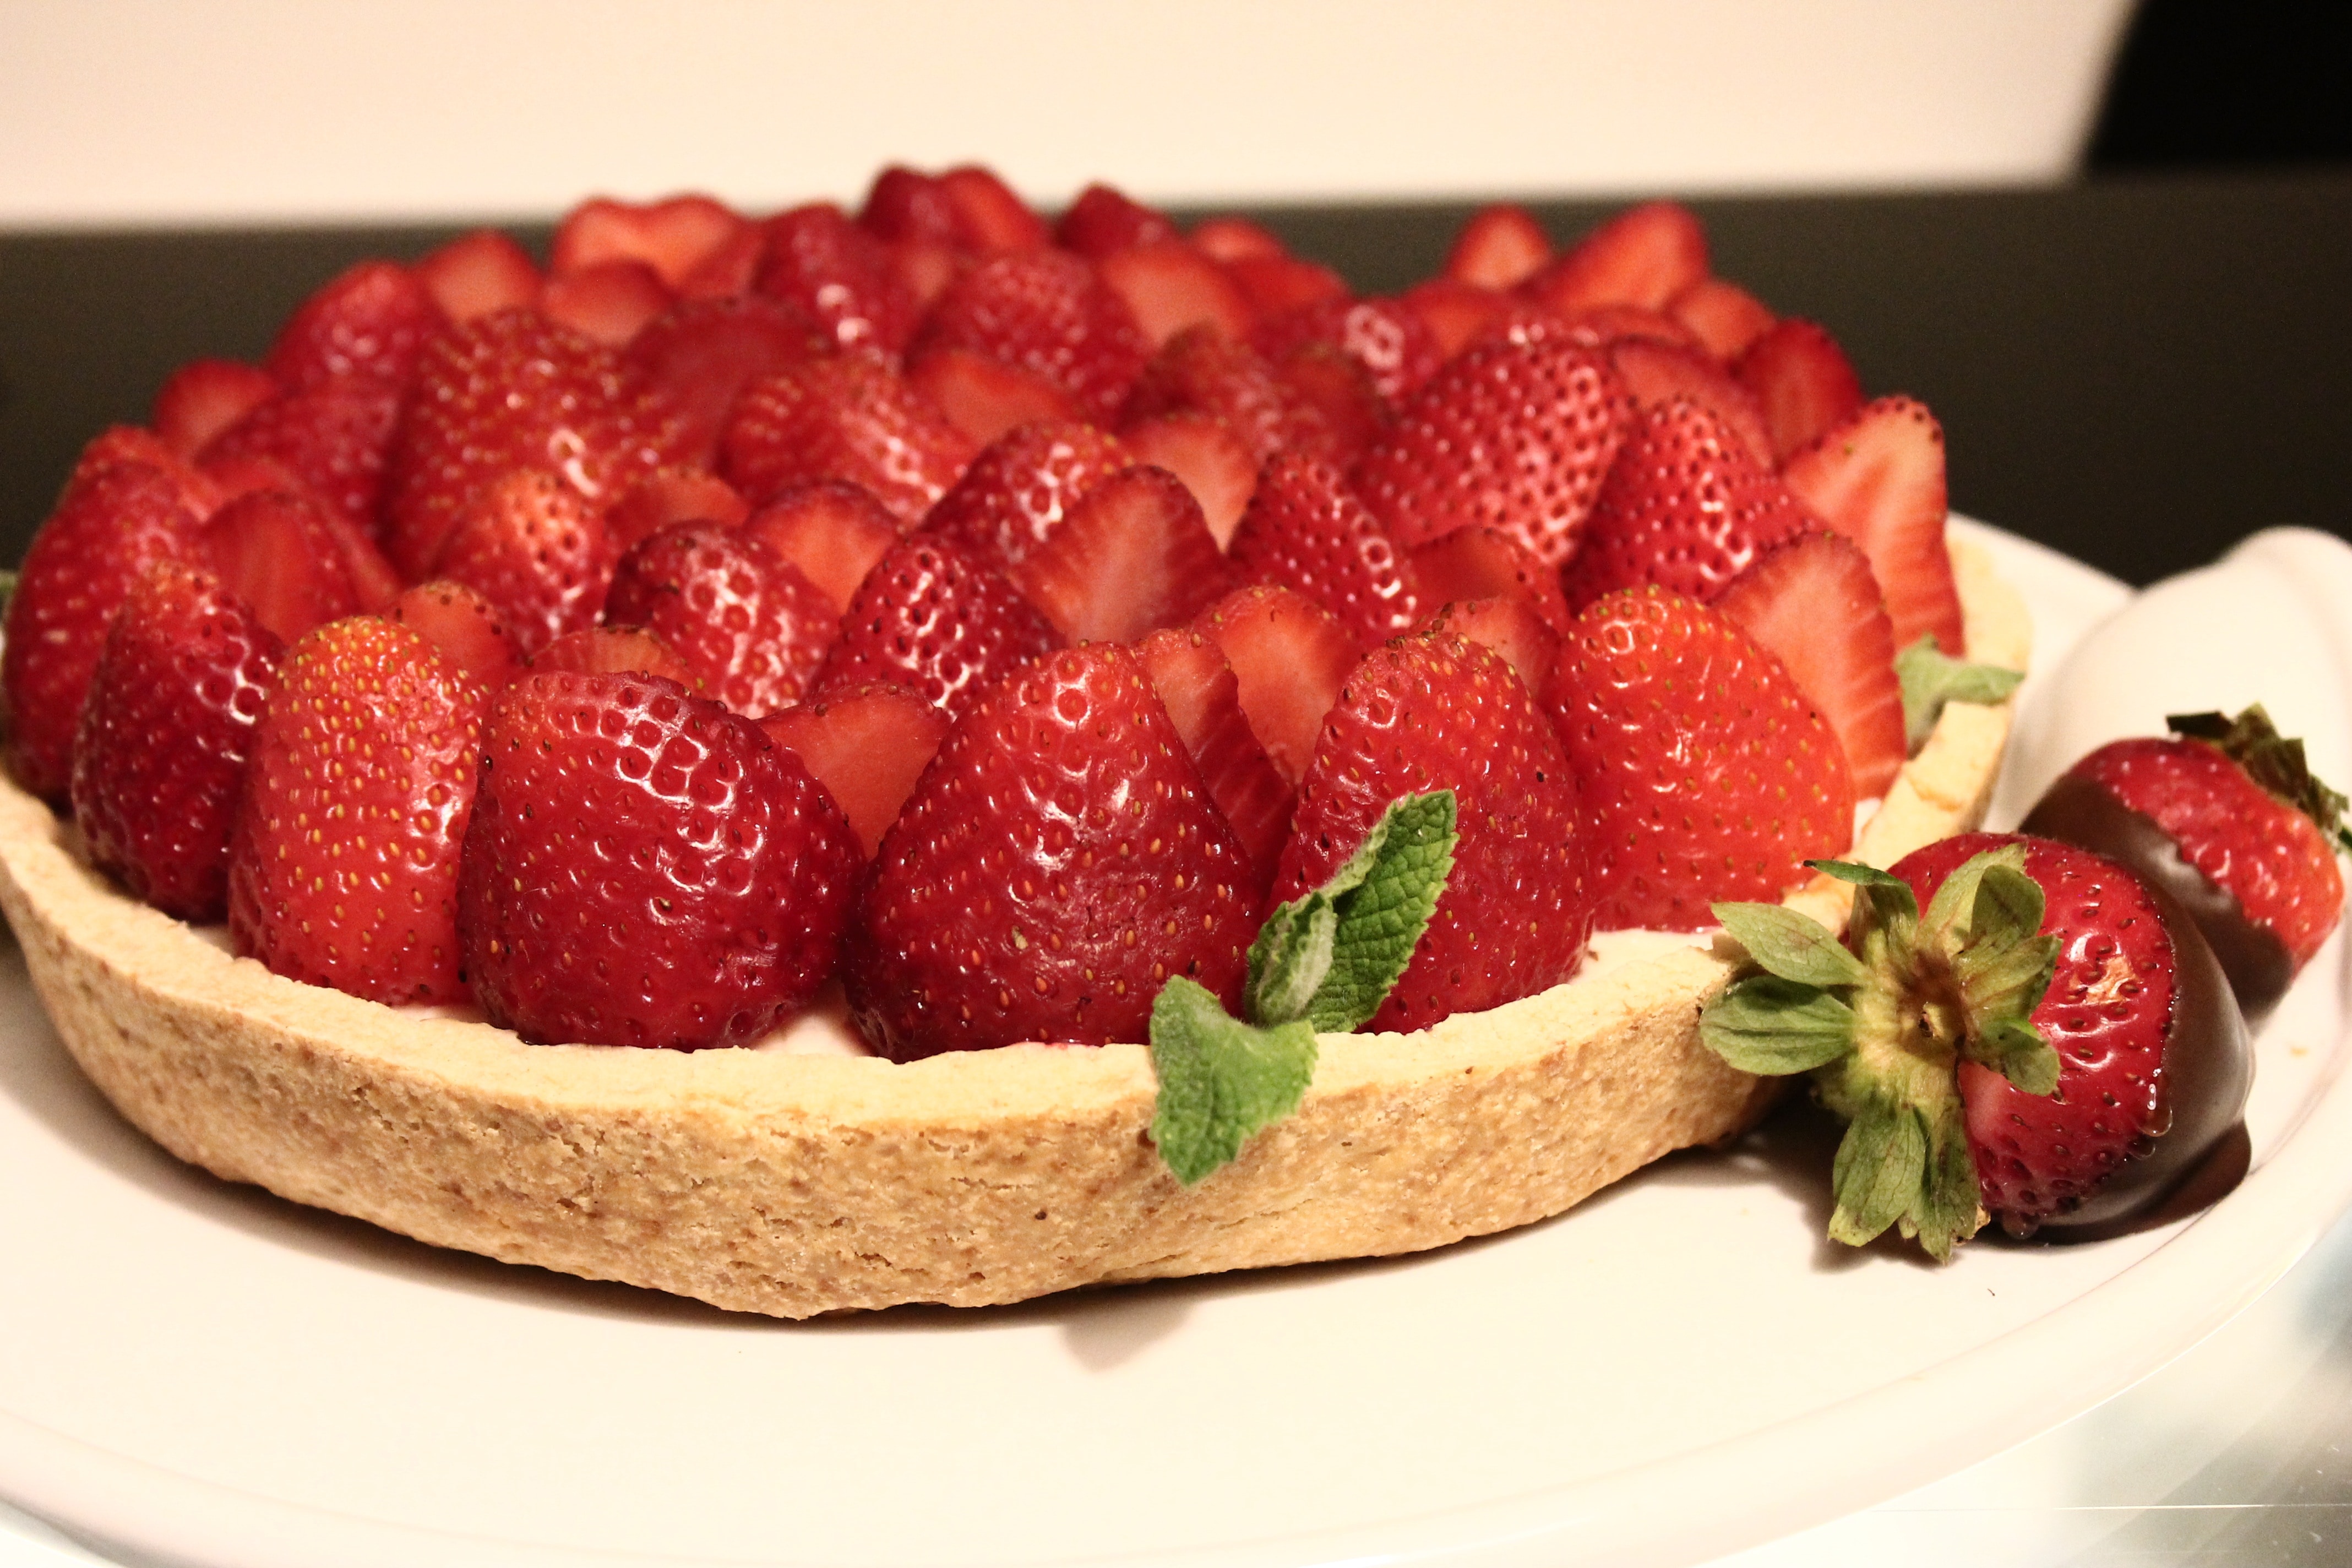 Strawberries, Pie, Sweet Space, strawberry, food and drink